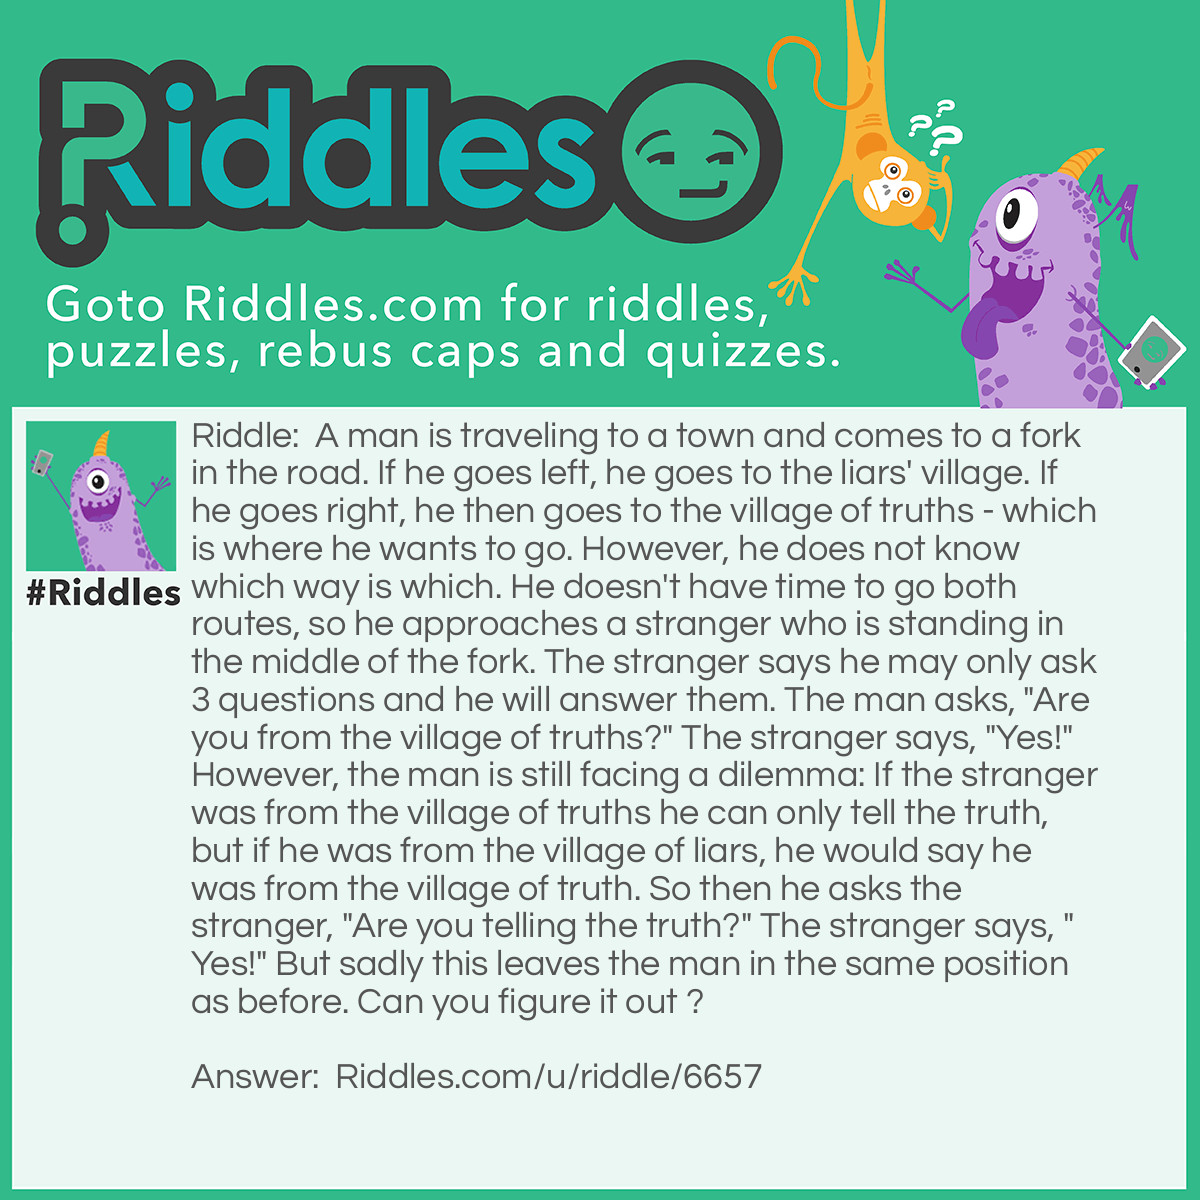 Riddle: A man is traveling to a town and comes to a fork in the road. If he goes left, he goes to the liars' village. If he goes right, he then goes to the village of truths - which is where he wants to go. However, he does not know which way is which. He doesn't have time to go both routes, so he approaches a stranger who is standing in the middle of the fork. The stranger says he may only ask 3 questions and he will answer them. The man asks, "Are you from the village of truths?" The stranger says, "Yes!" However, the man is still facing a dilemma: If the stranger was from the village of truths he can only tell the truth, but if he was from the village of liars, he would say he was from the village of truth. So then he asks the stranger, "Are you telling the truth?" The stranger says, "Yes!" But sadly this leaves the man in the same position as before. Can you figure it out ? Answer: The man asks the stranger the path back to his own village. If the stranger was from village of truths, he takes him there. If he was from the village of liars, he will still take him to the village of truths as he would be compelled to lie.